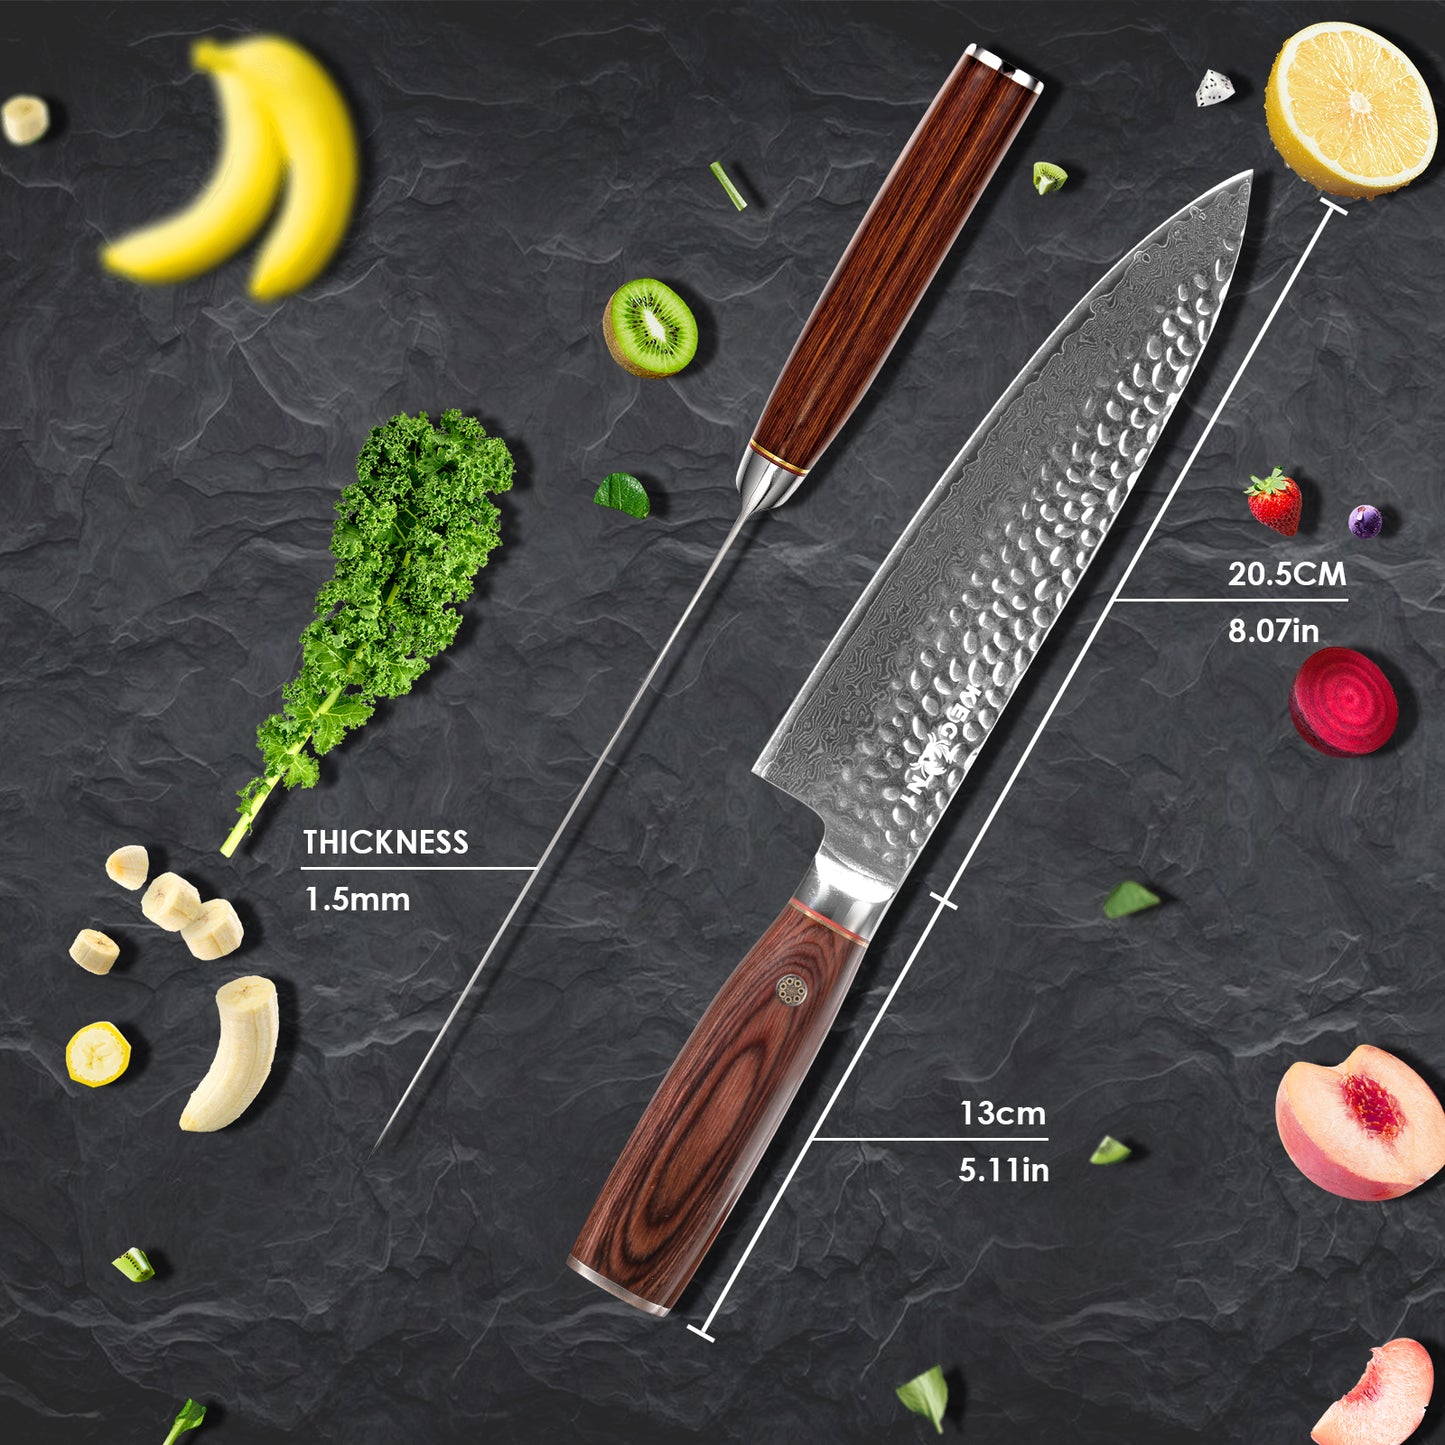 Kegani 8 Inch Damascus Chef Knife 67 Layers 10Cr15CoMoV Japanese Knife Hammered Texture Damascus Knife - FullTang Wood Handle Chefs Knife With Gift Box&Sheath